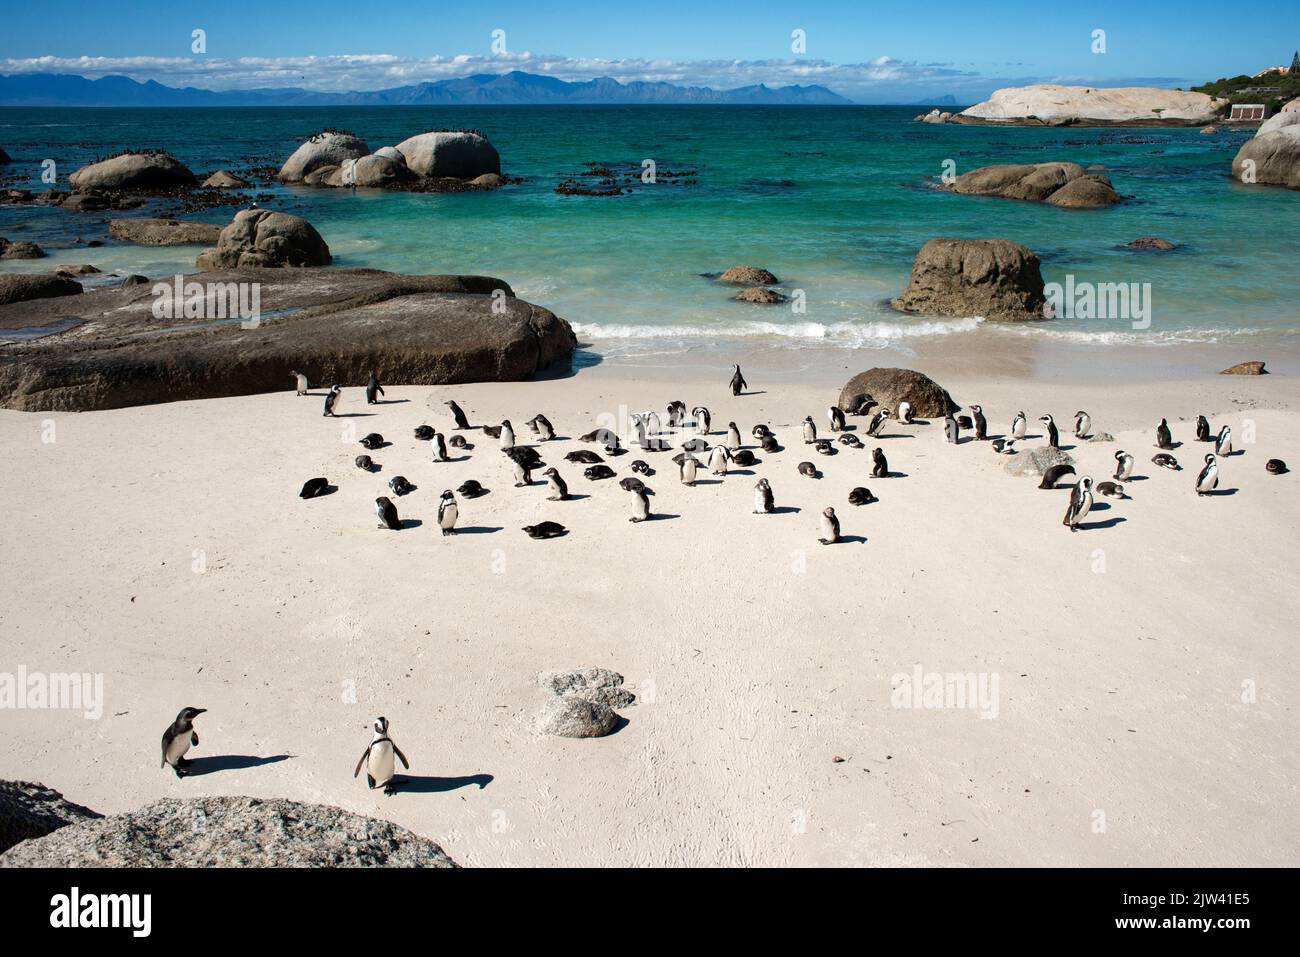 African Penguin, Spheniscus demersus, Boulders Beach, Simon's Town, Cape Town, Western Cape, South Africa.  Overfishing and climate change corner the Stock Photo